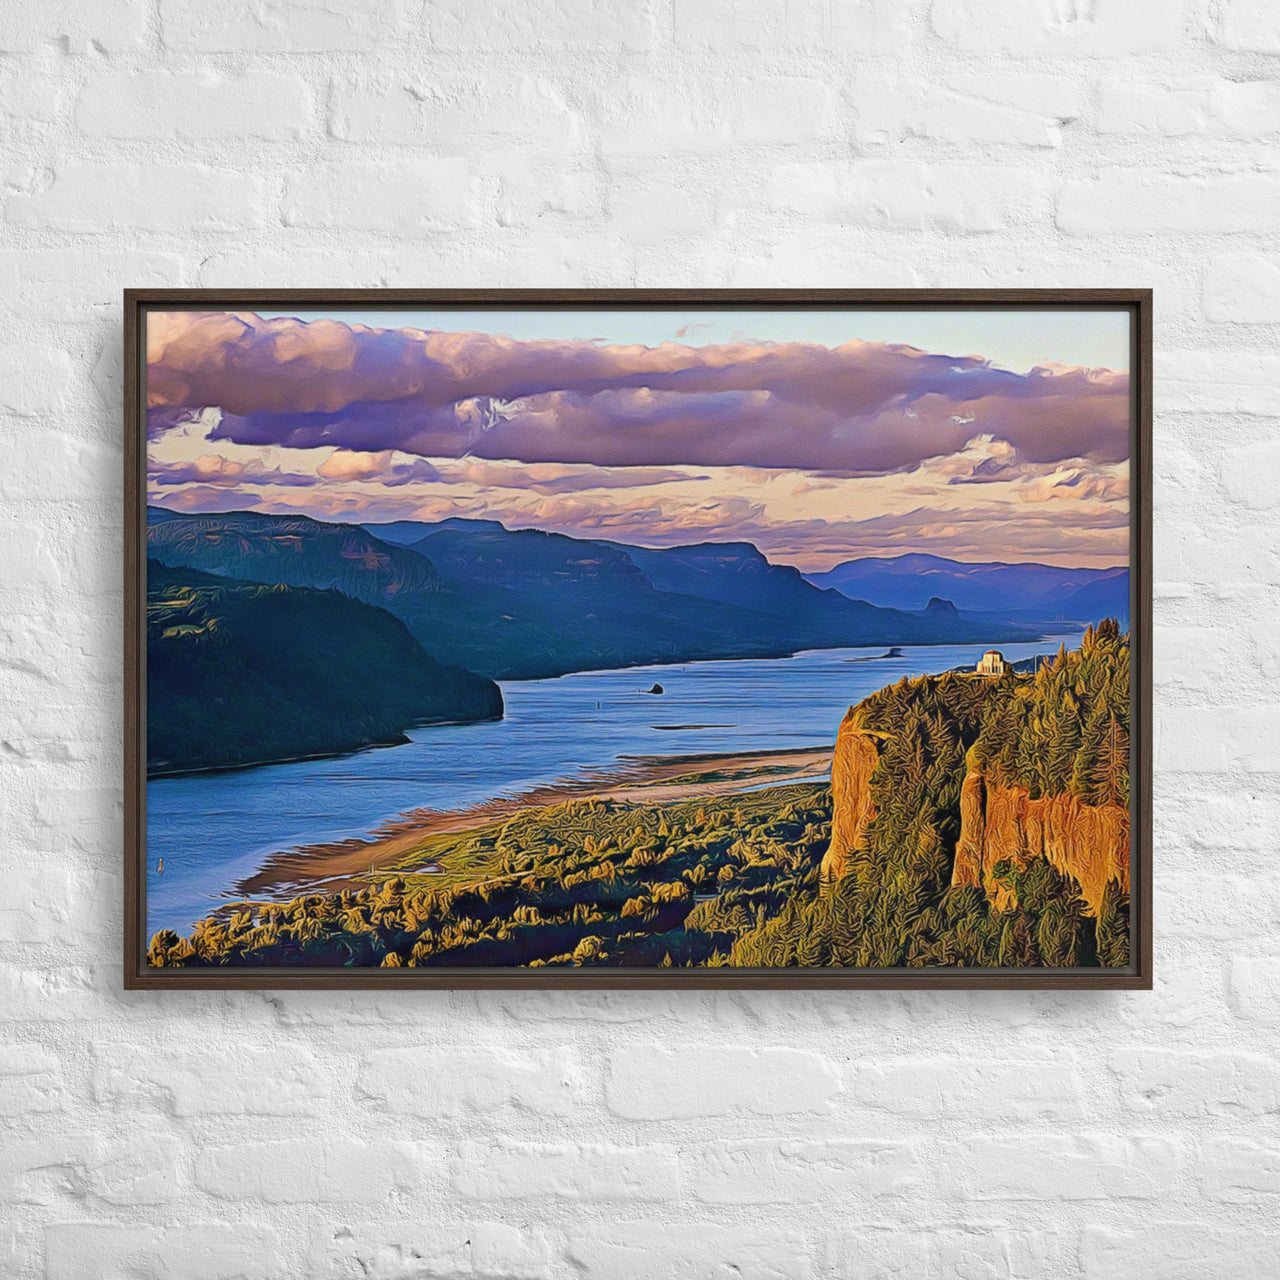 Columbia River Gorge - Digital Art - Framed canvas - FREE SHIPPING